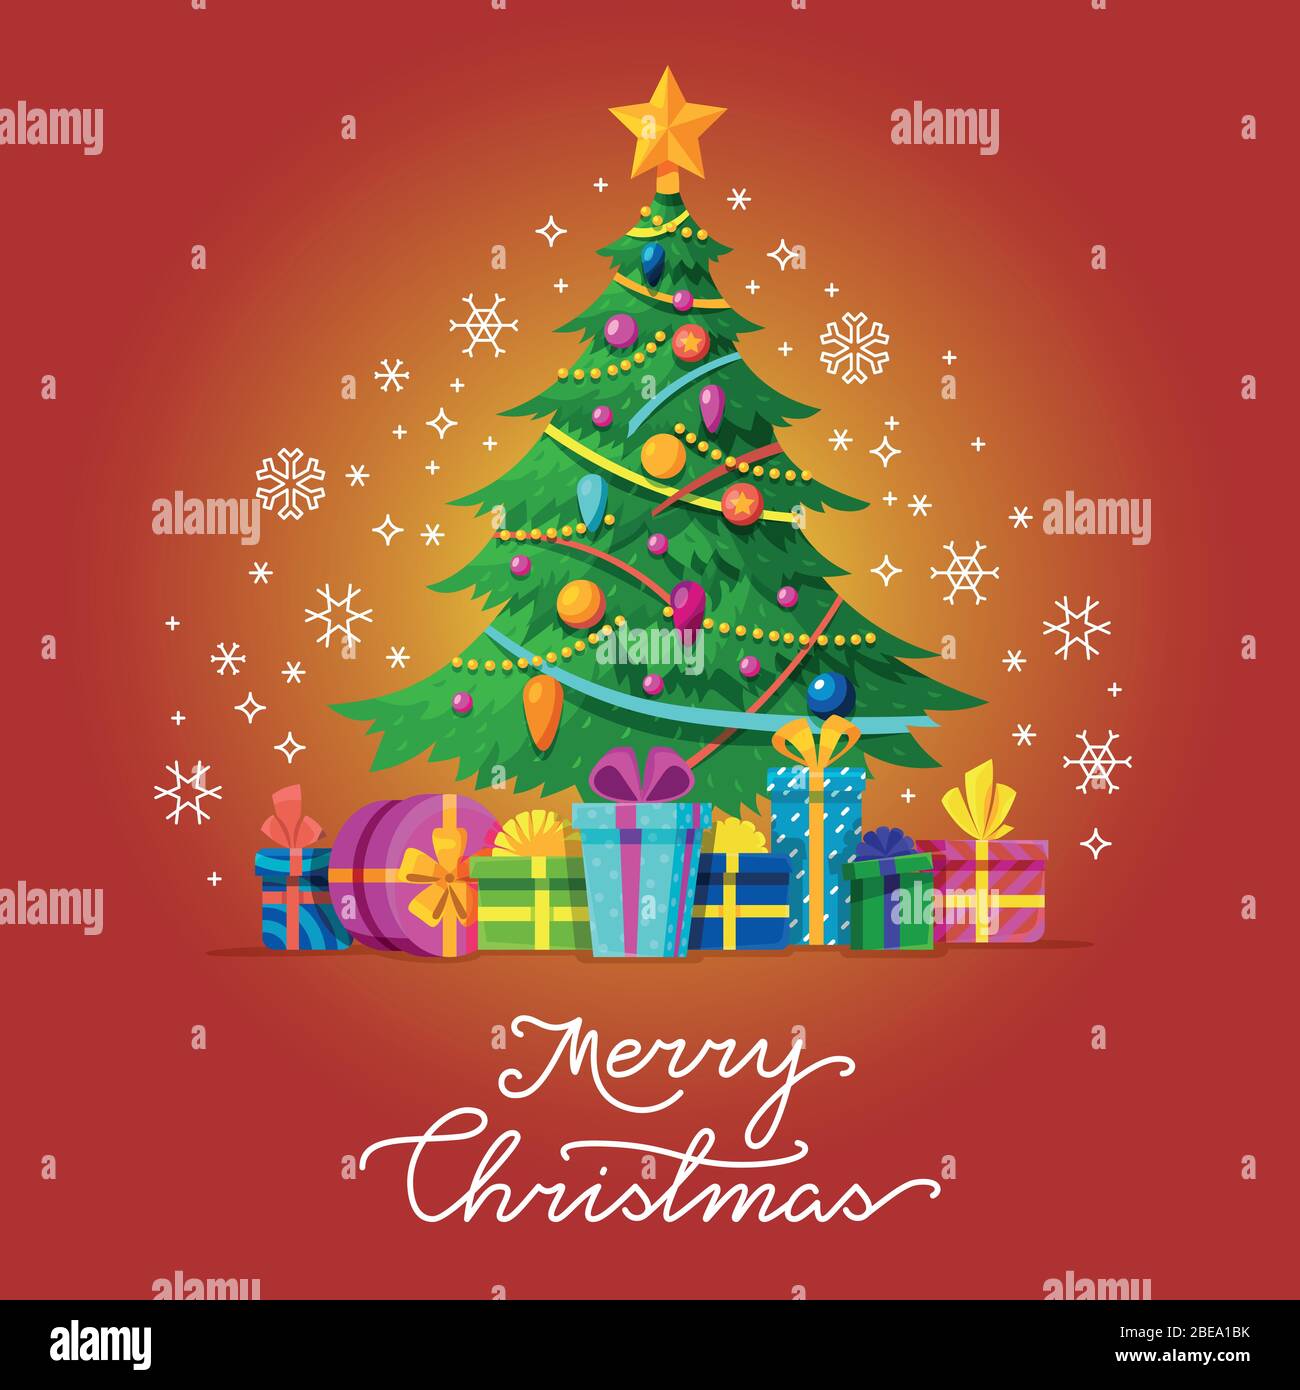 Merry Christmas vector greeting card with Xmas tree. Holiday celebration new year with tree illustration Stock Vector